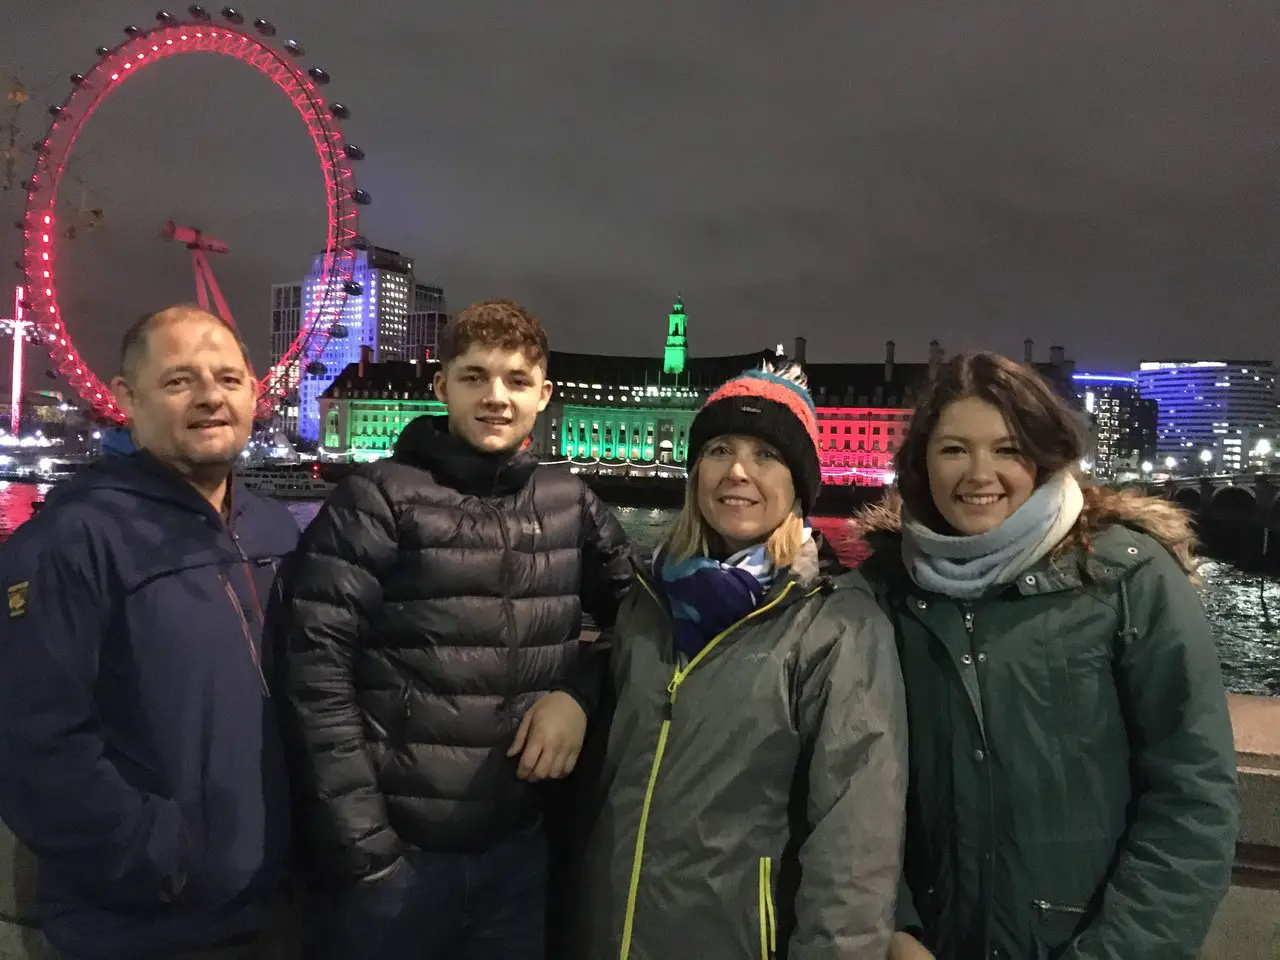 Family Christmas in London. Ella and her family standing in front of the London Eye at night